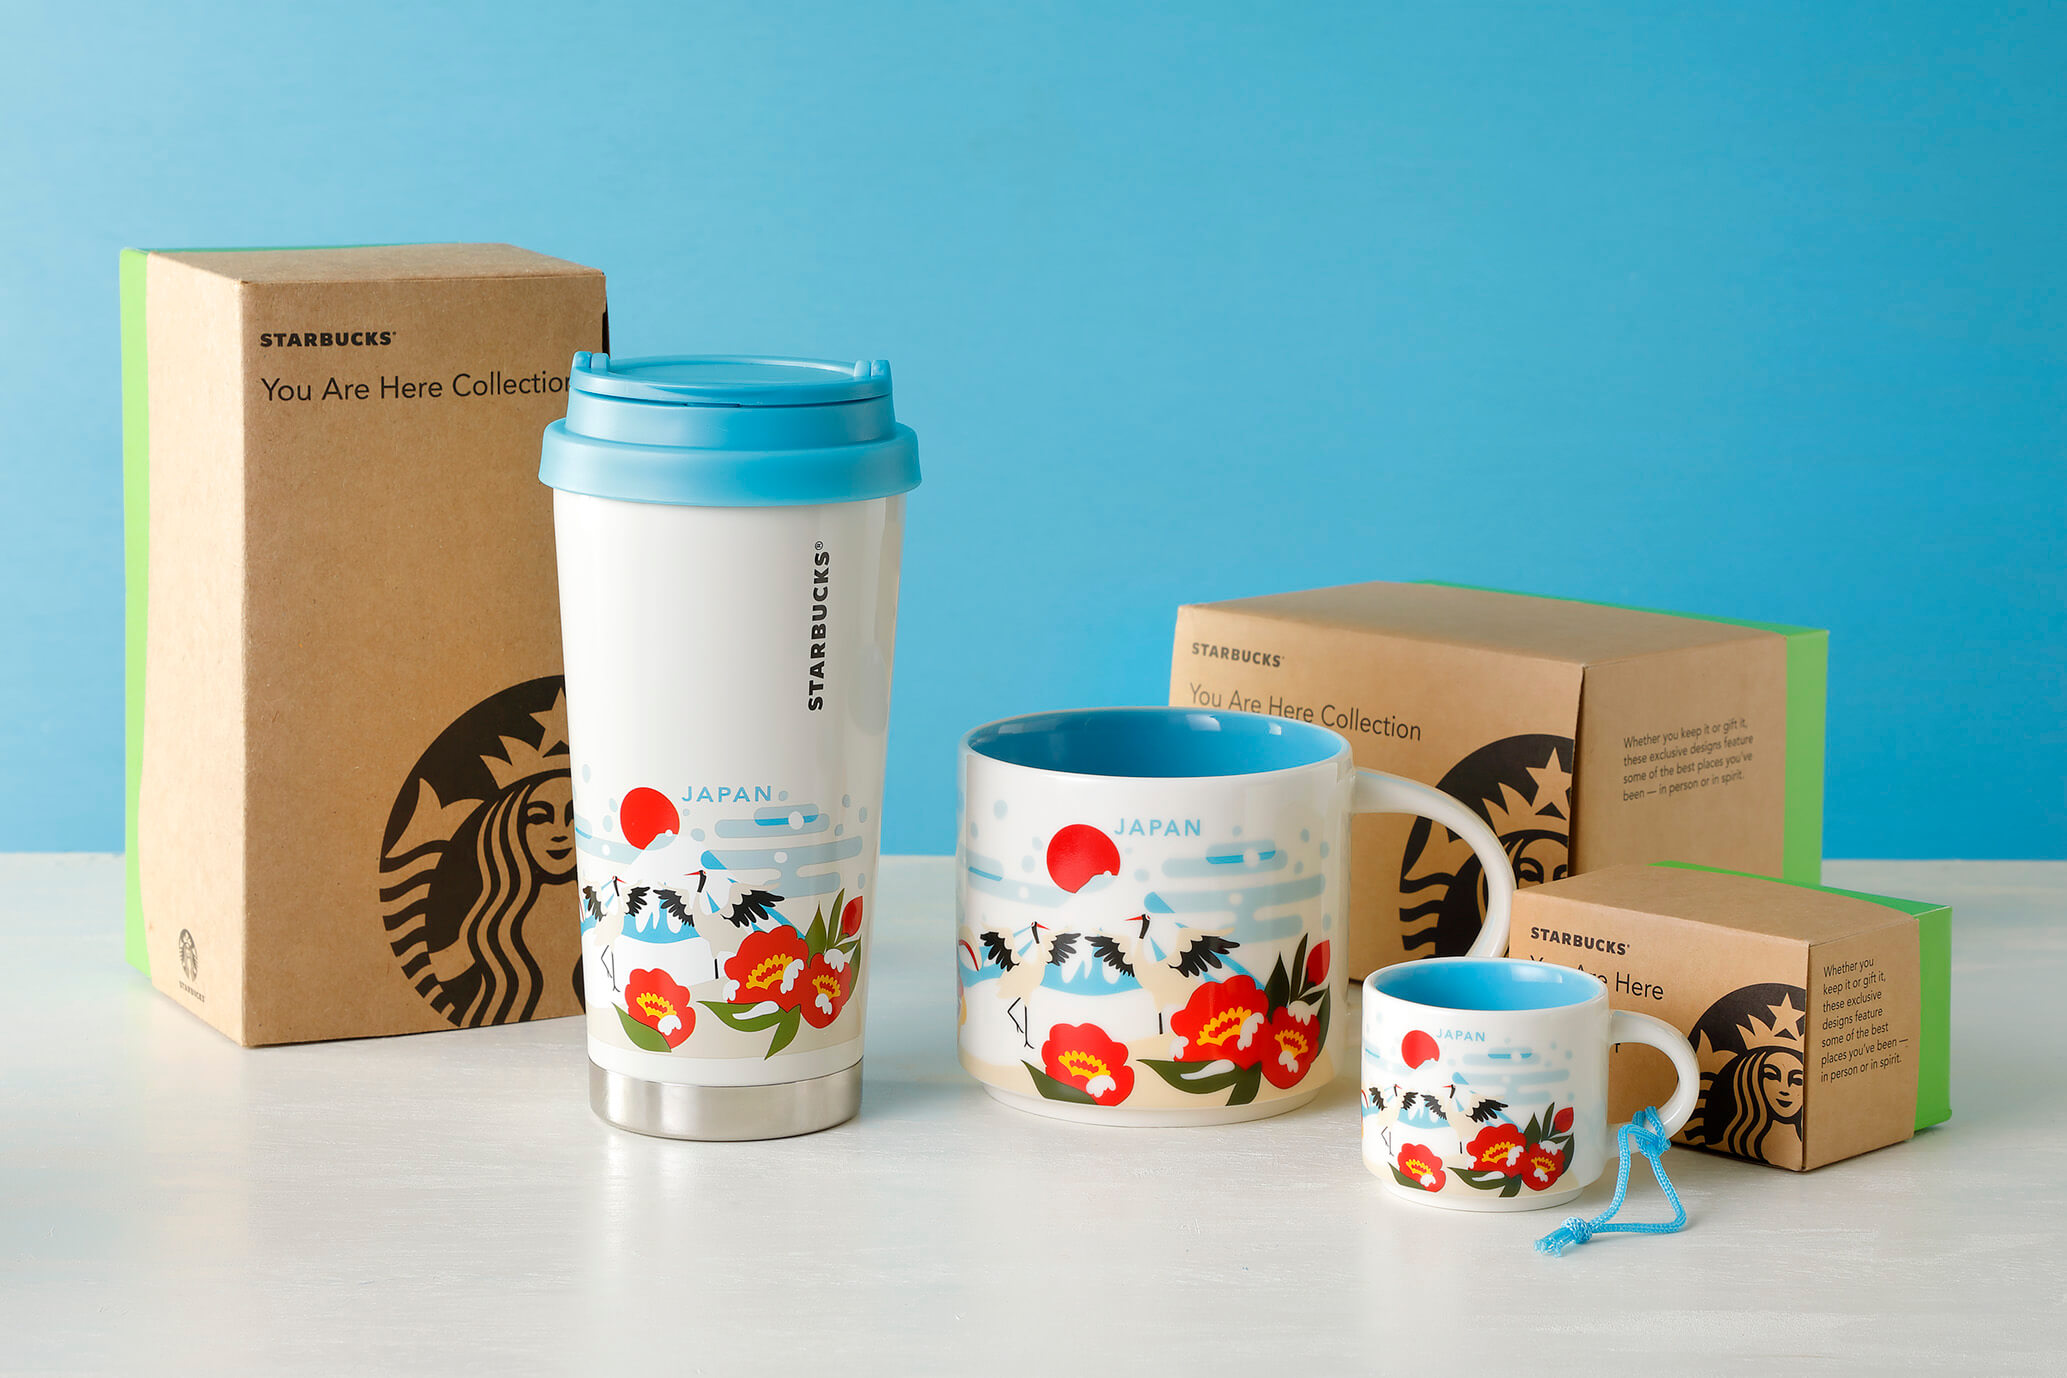 Starbucks Japan adds new winter Mt Fuji mugs to regionexclusive You Are Here Collection